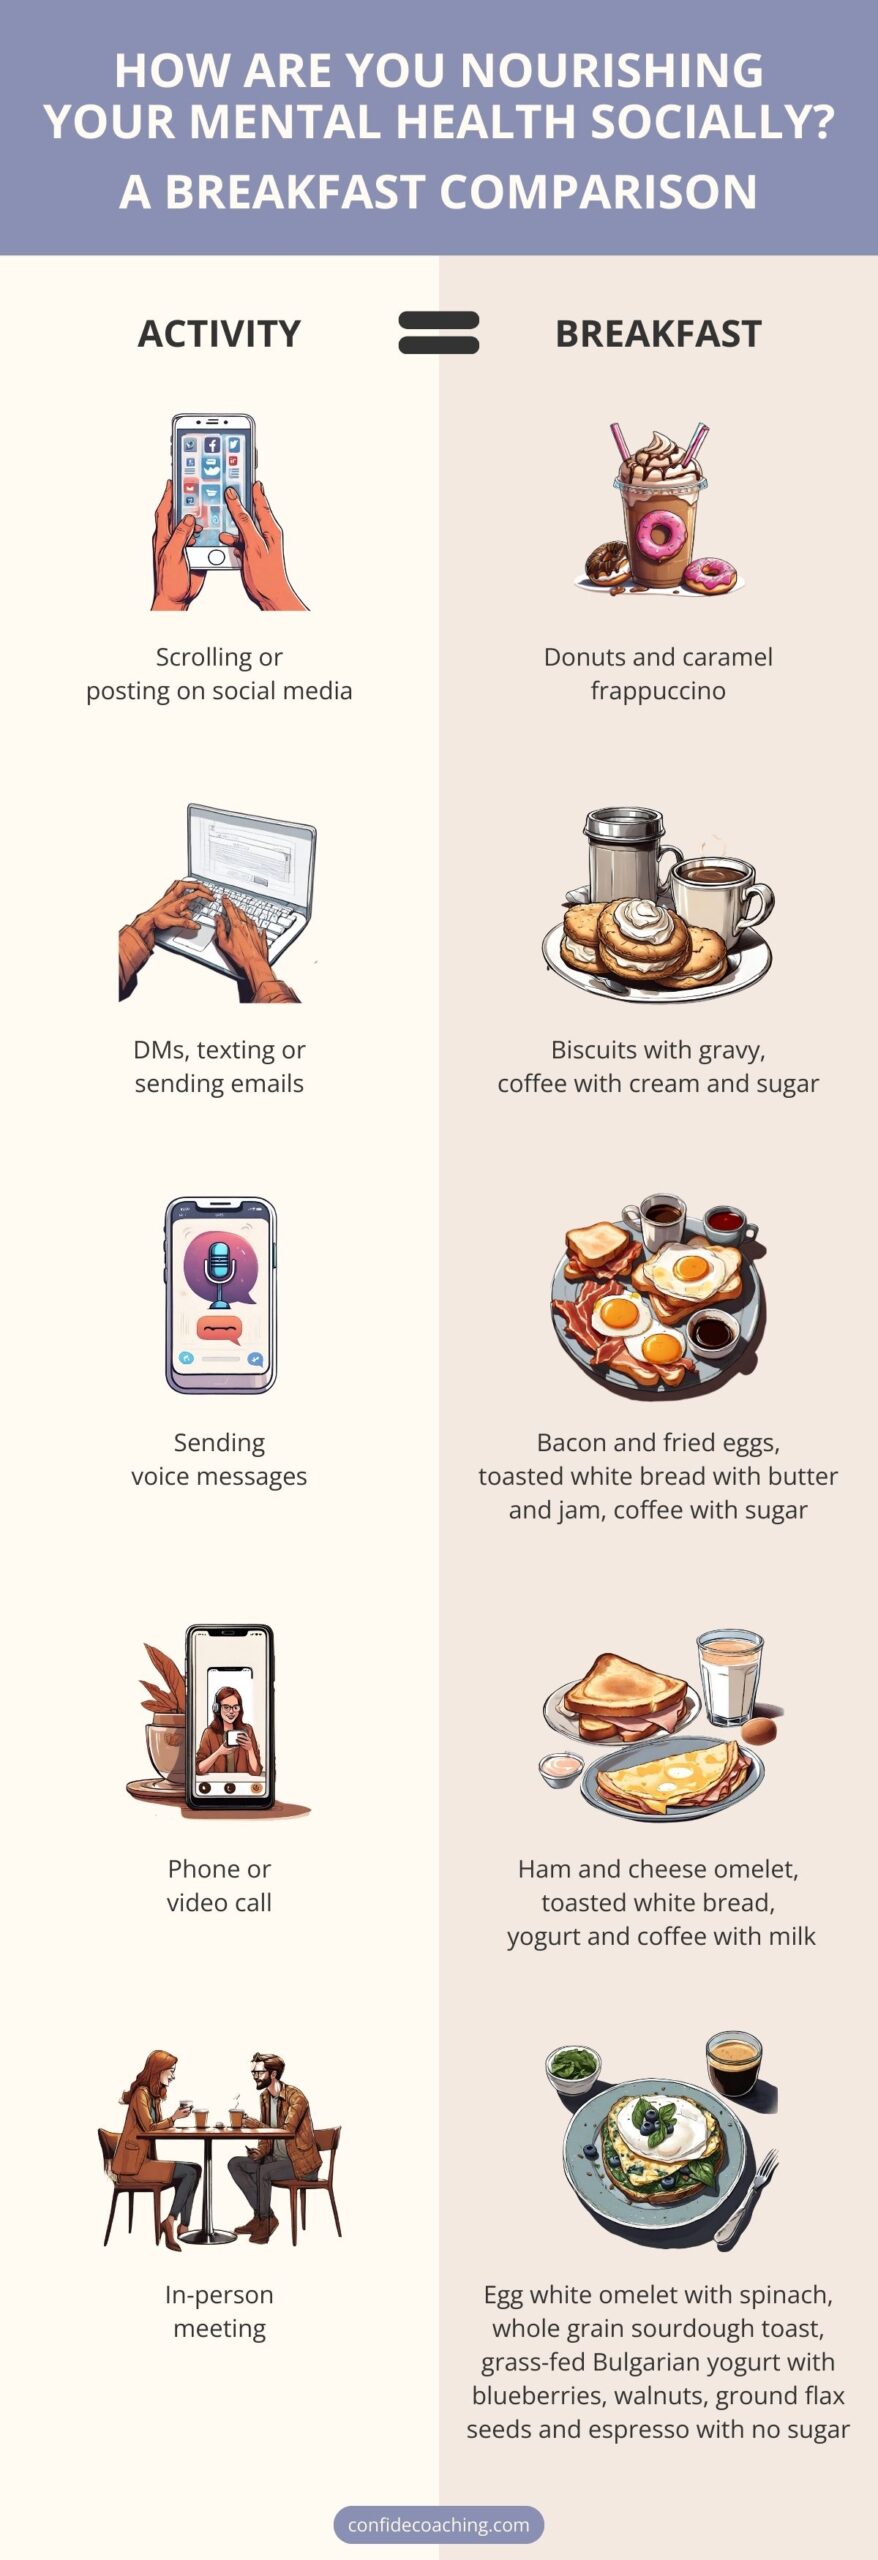 Analogy showing different modes of communication and their breakfast equivalents